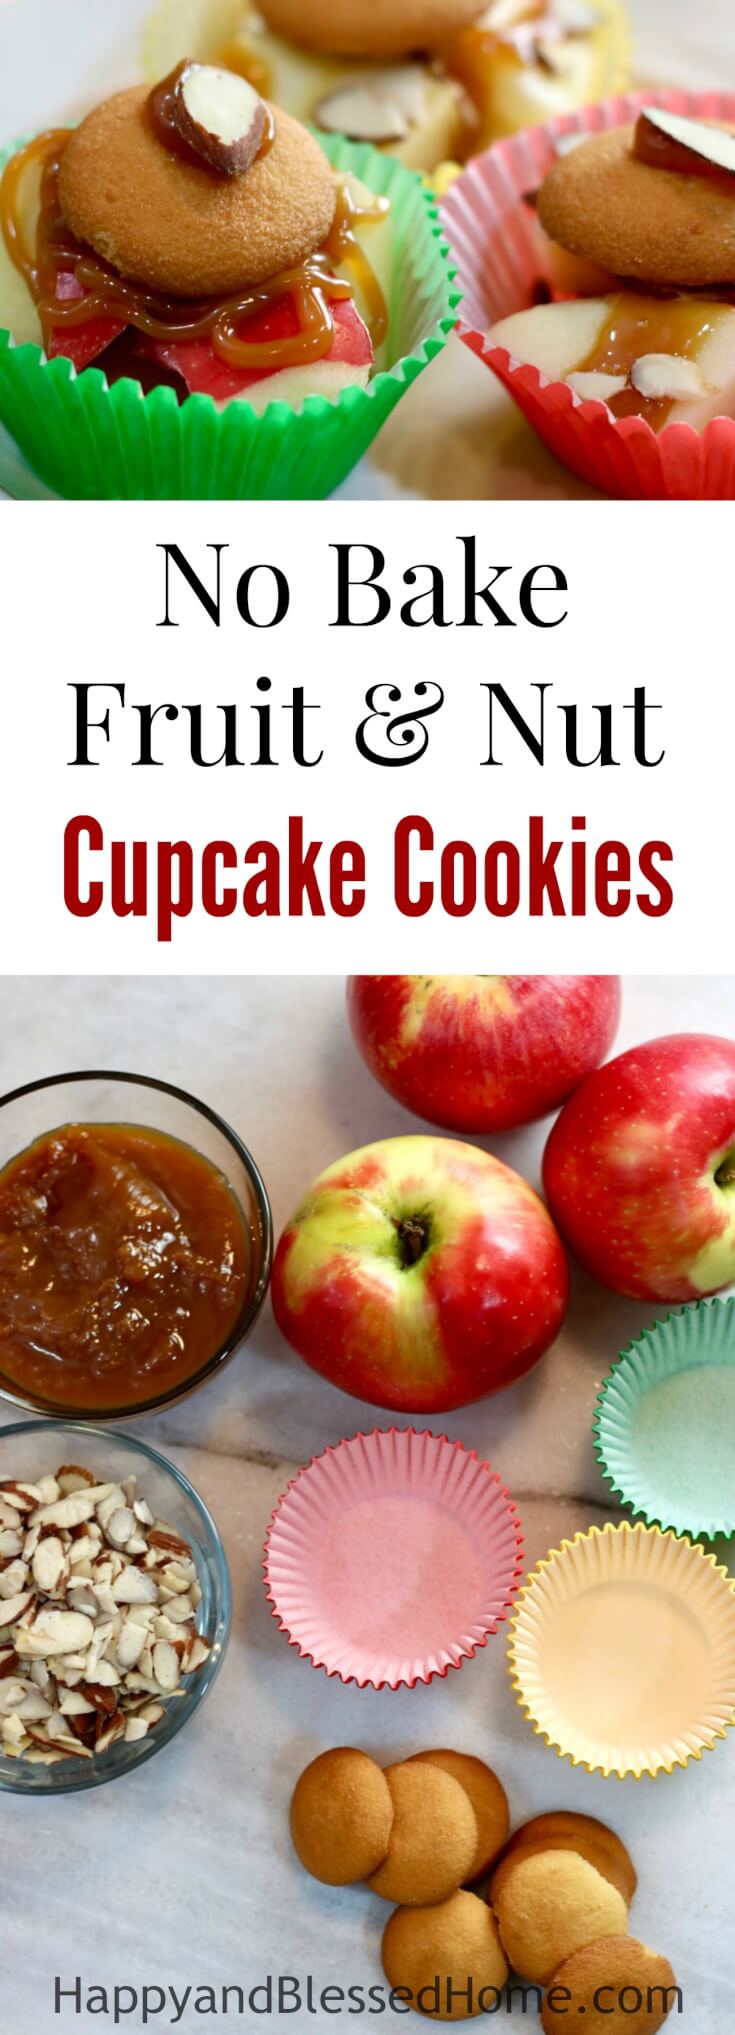 I'm not turning on the over in summer! I love this easy recipe on how to make No-Bake Fruit and Nut Cupcake Cookies. Perfect for snacks and my kids eat more fruits and nuts - WOOT!